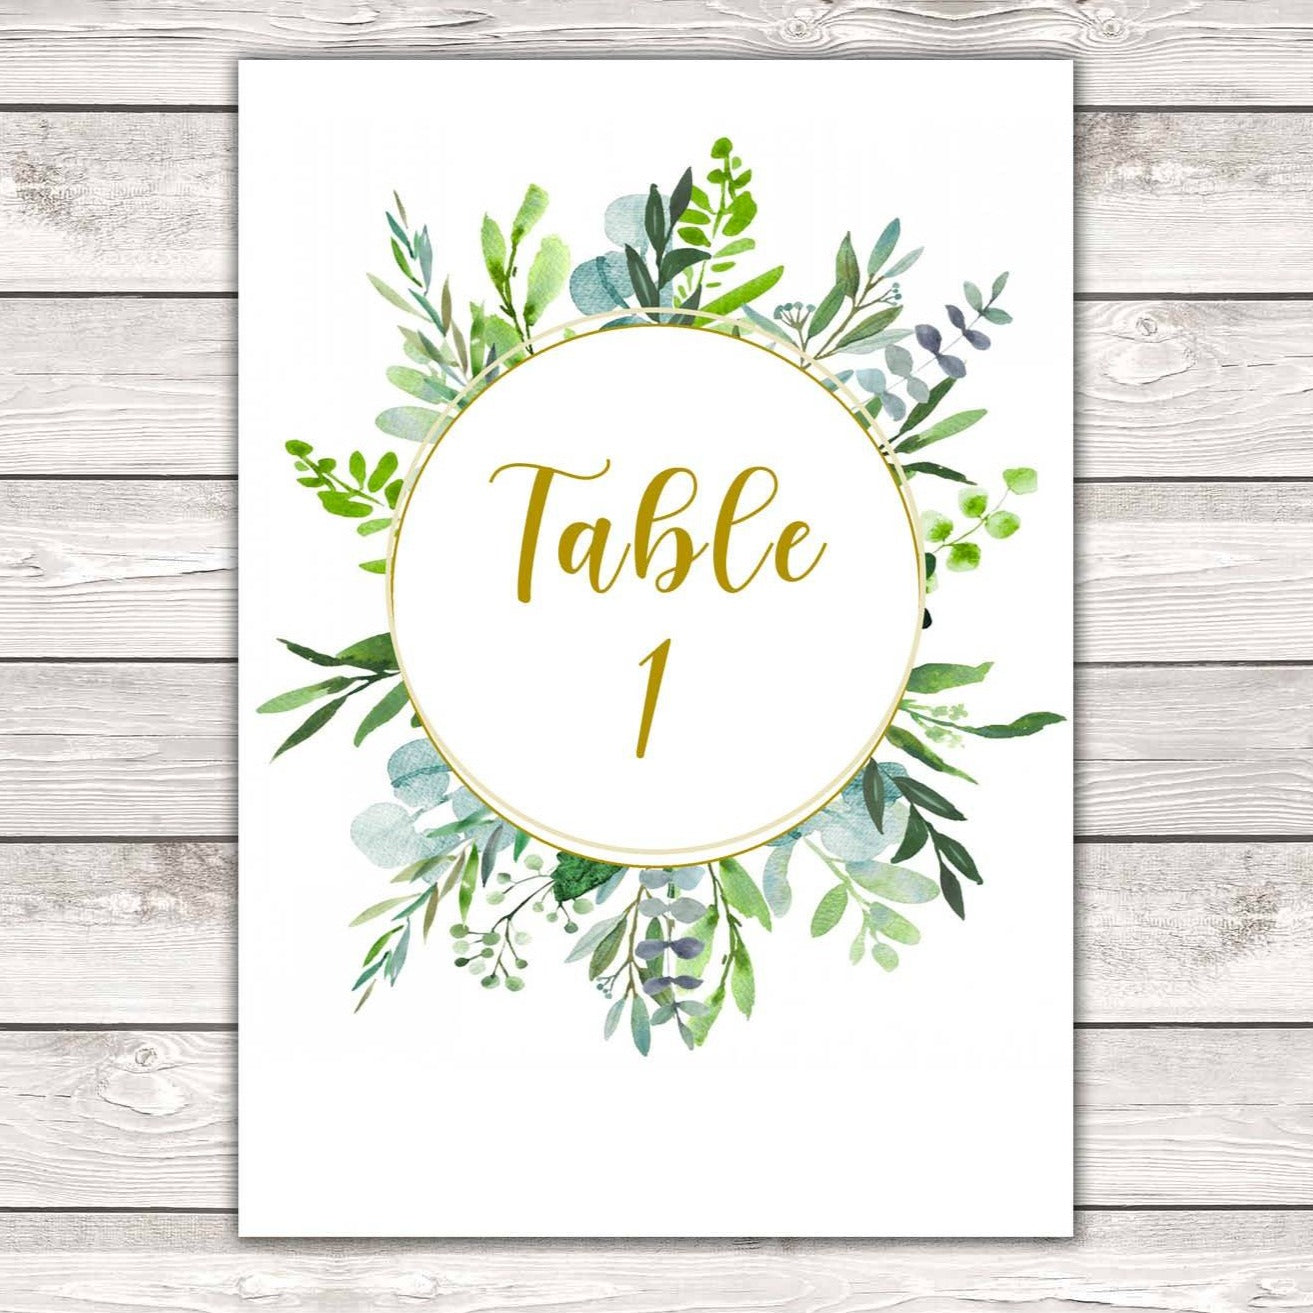 Foliage Floral Table Numbers - Set of 10